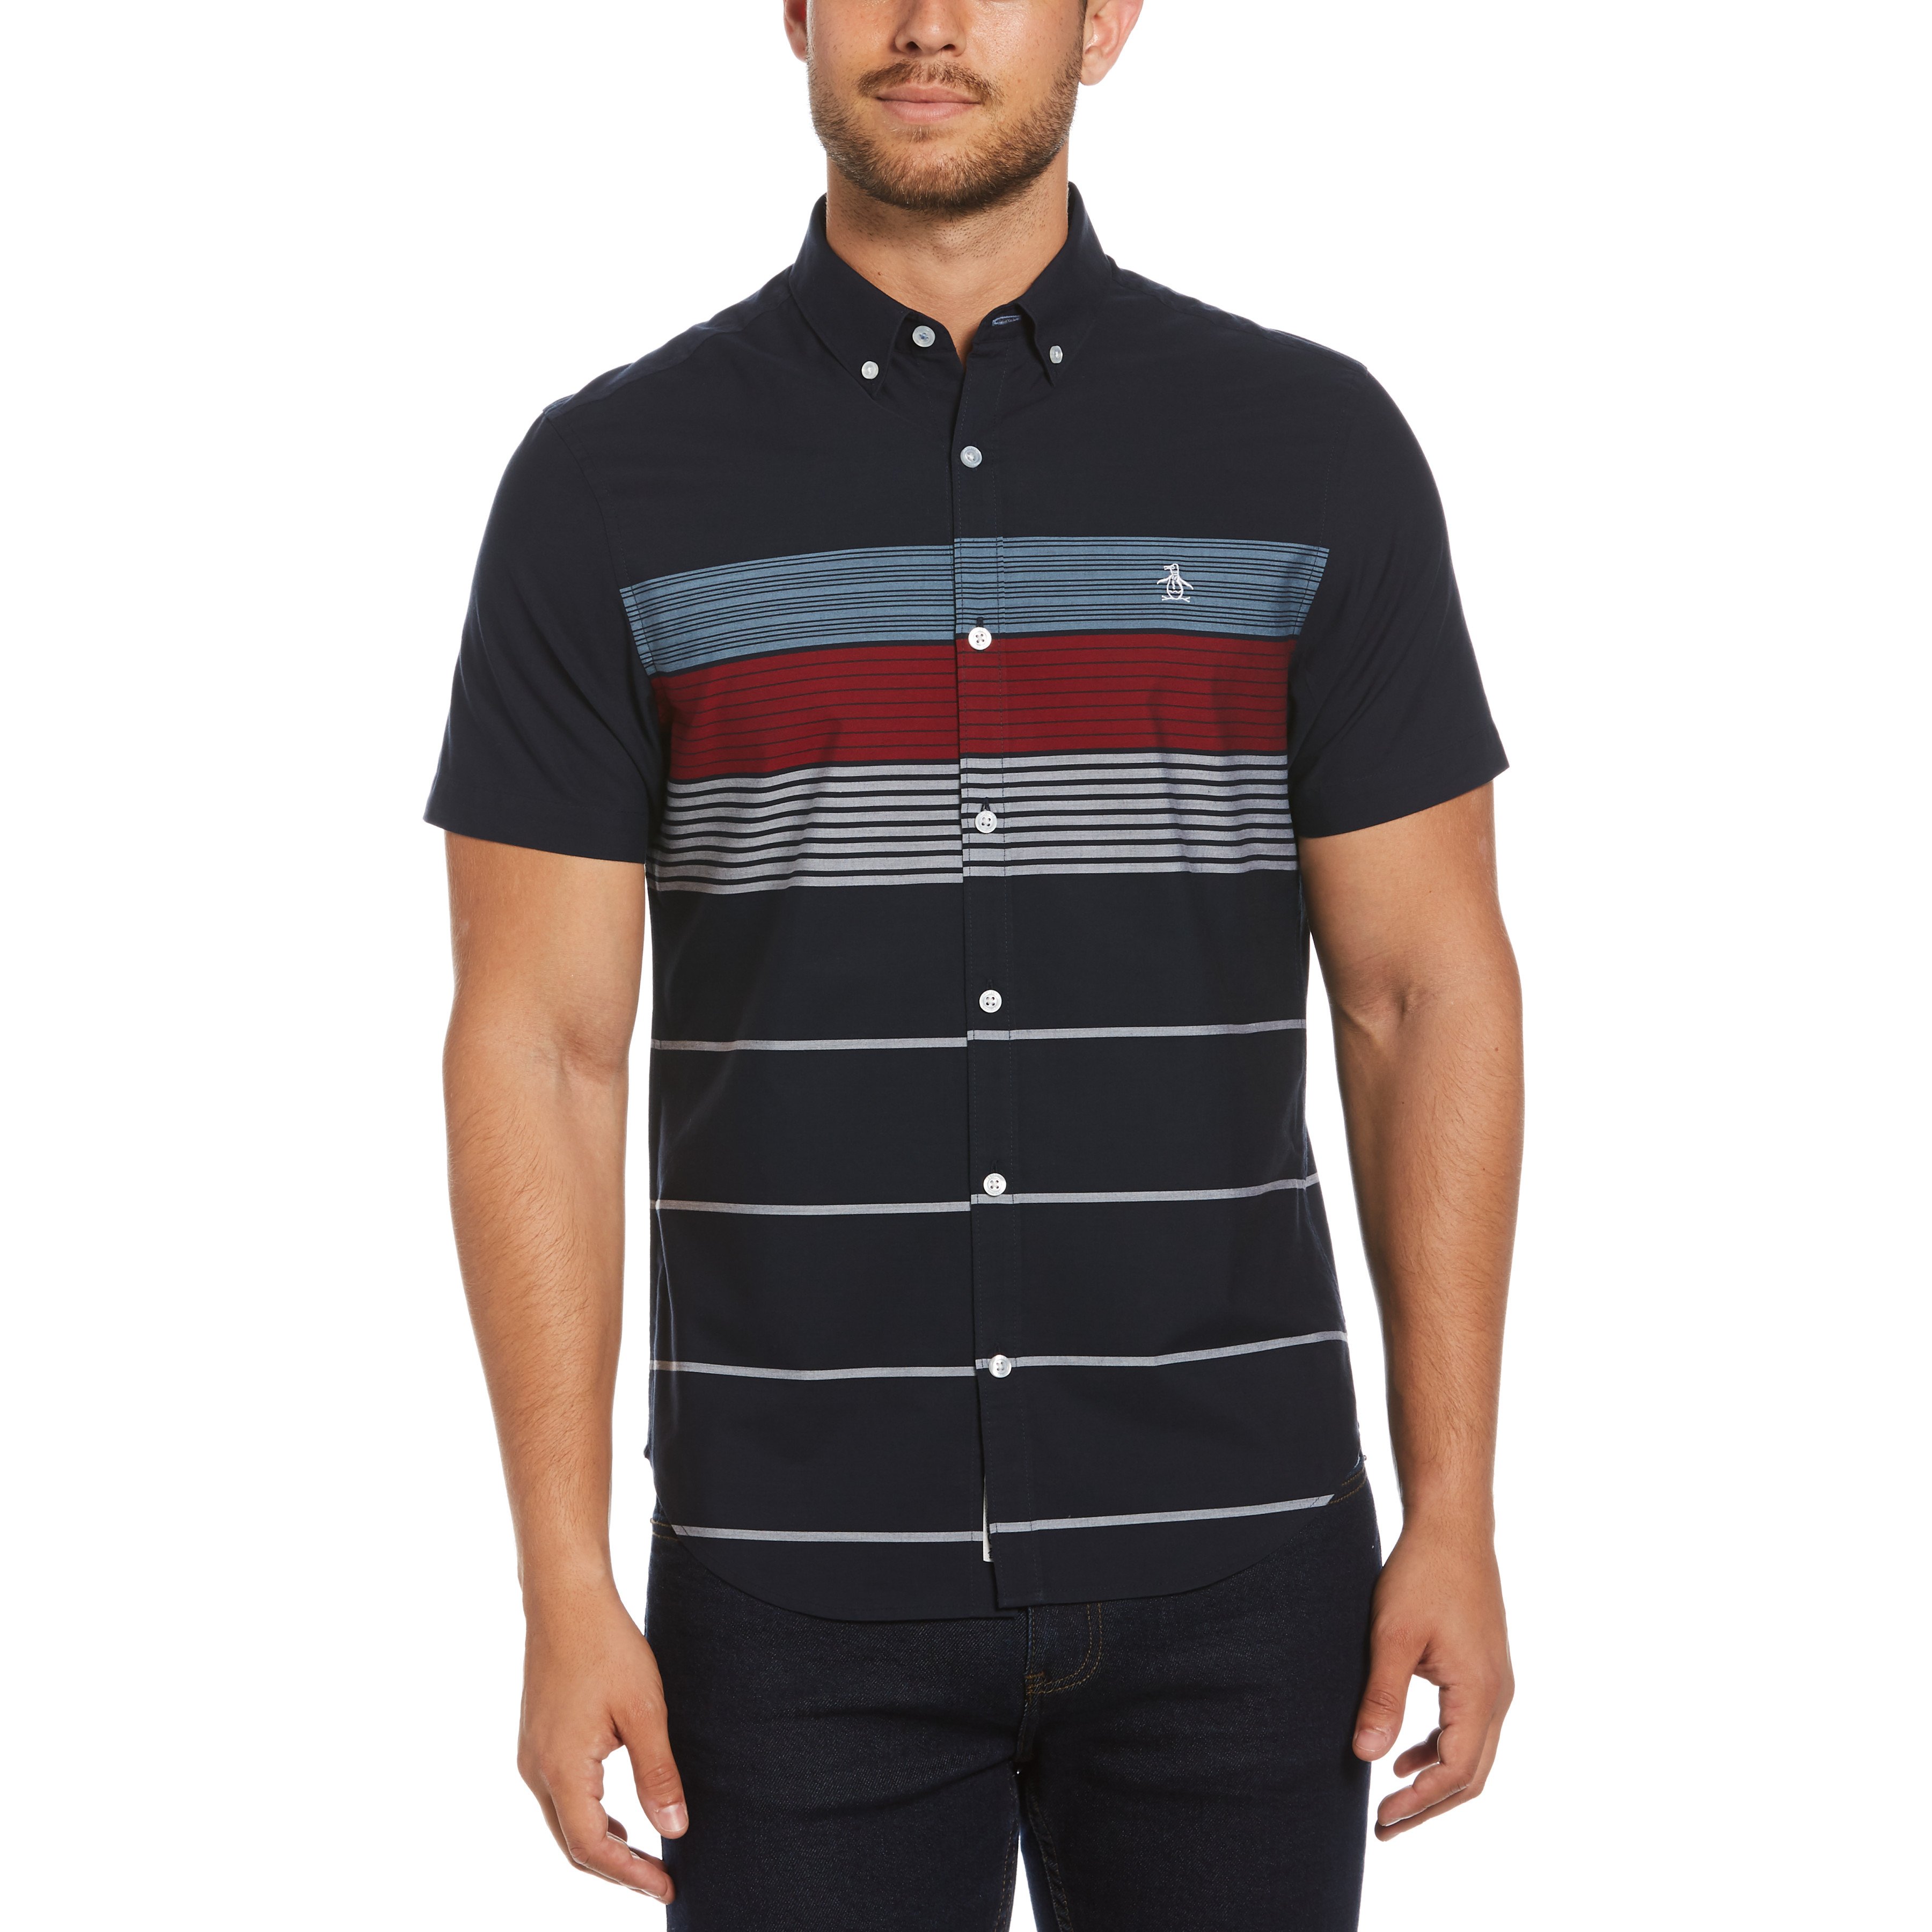 Extra 40% Off Select Styles with code GET40 at Original Penguin! $24